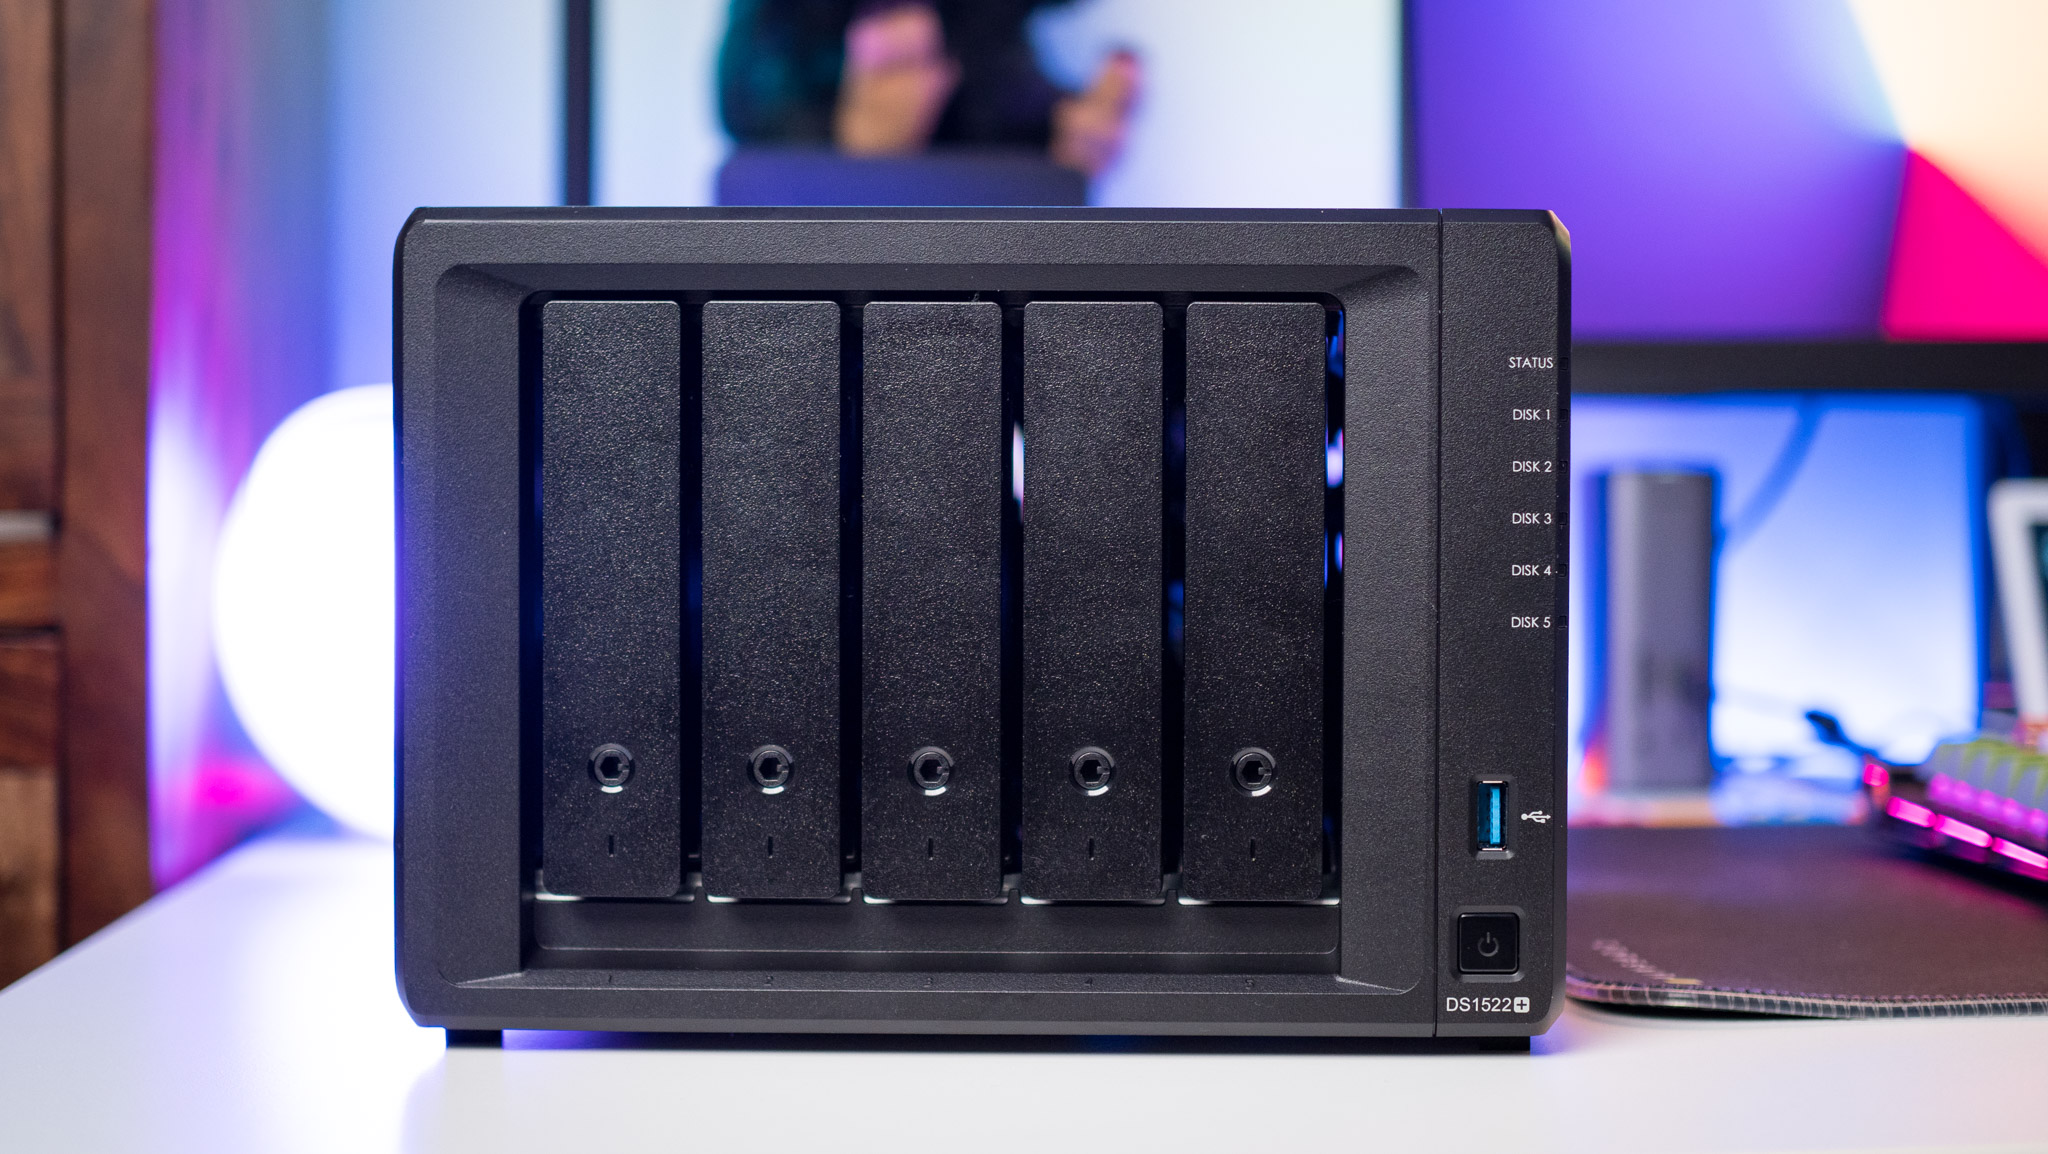 NAS, Plex Server enthusiasts will absolutely love these WD Toshiba